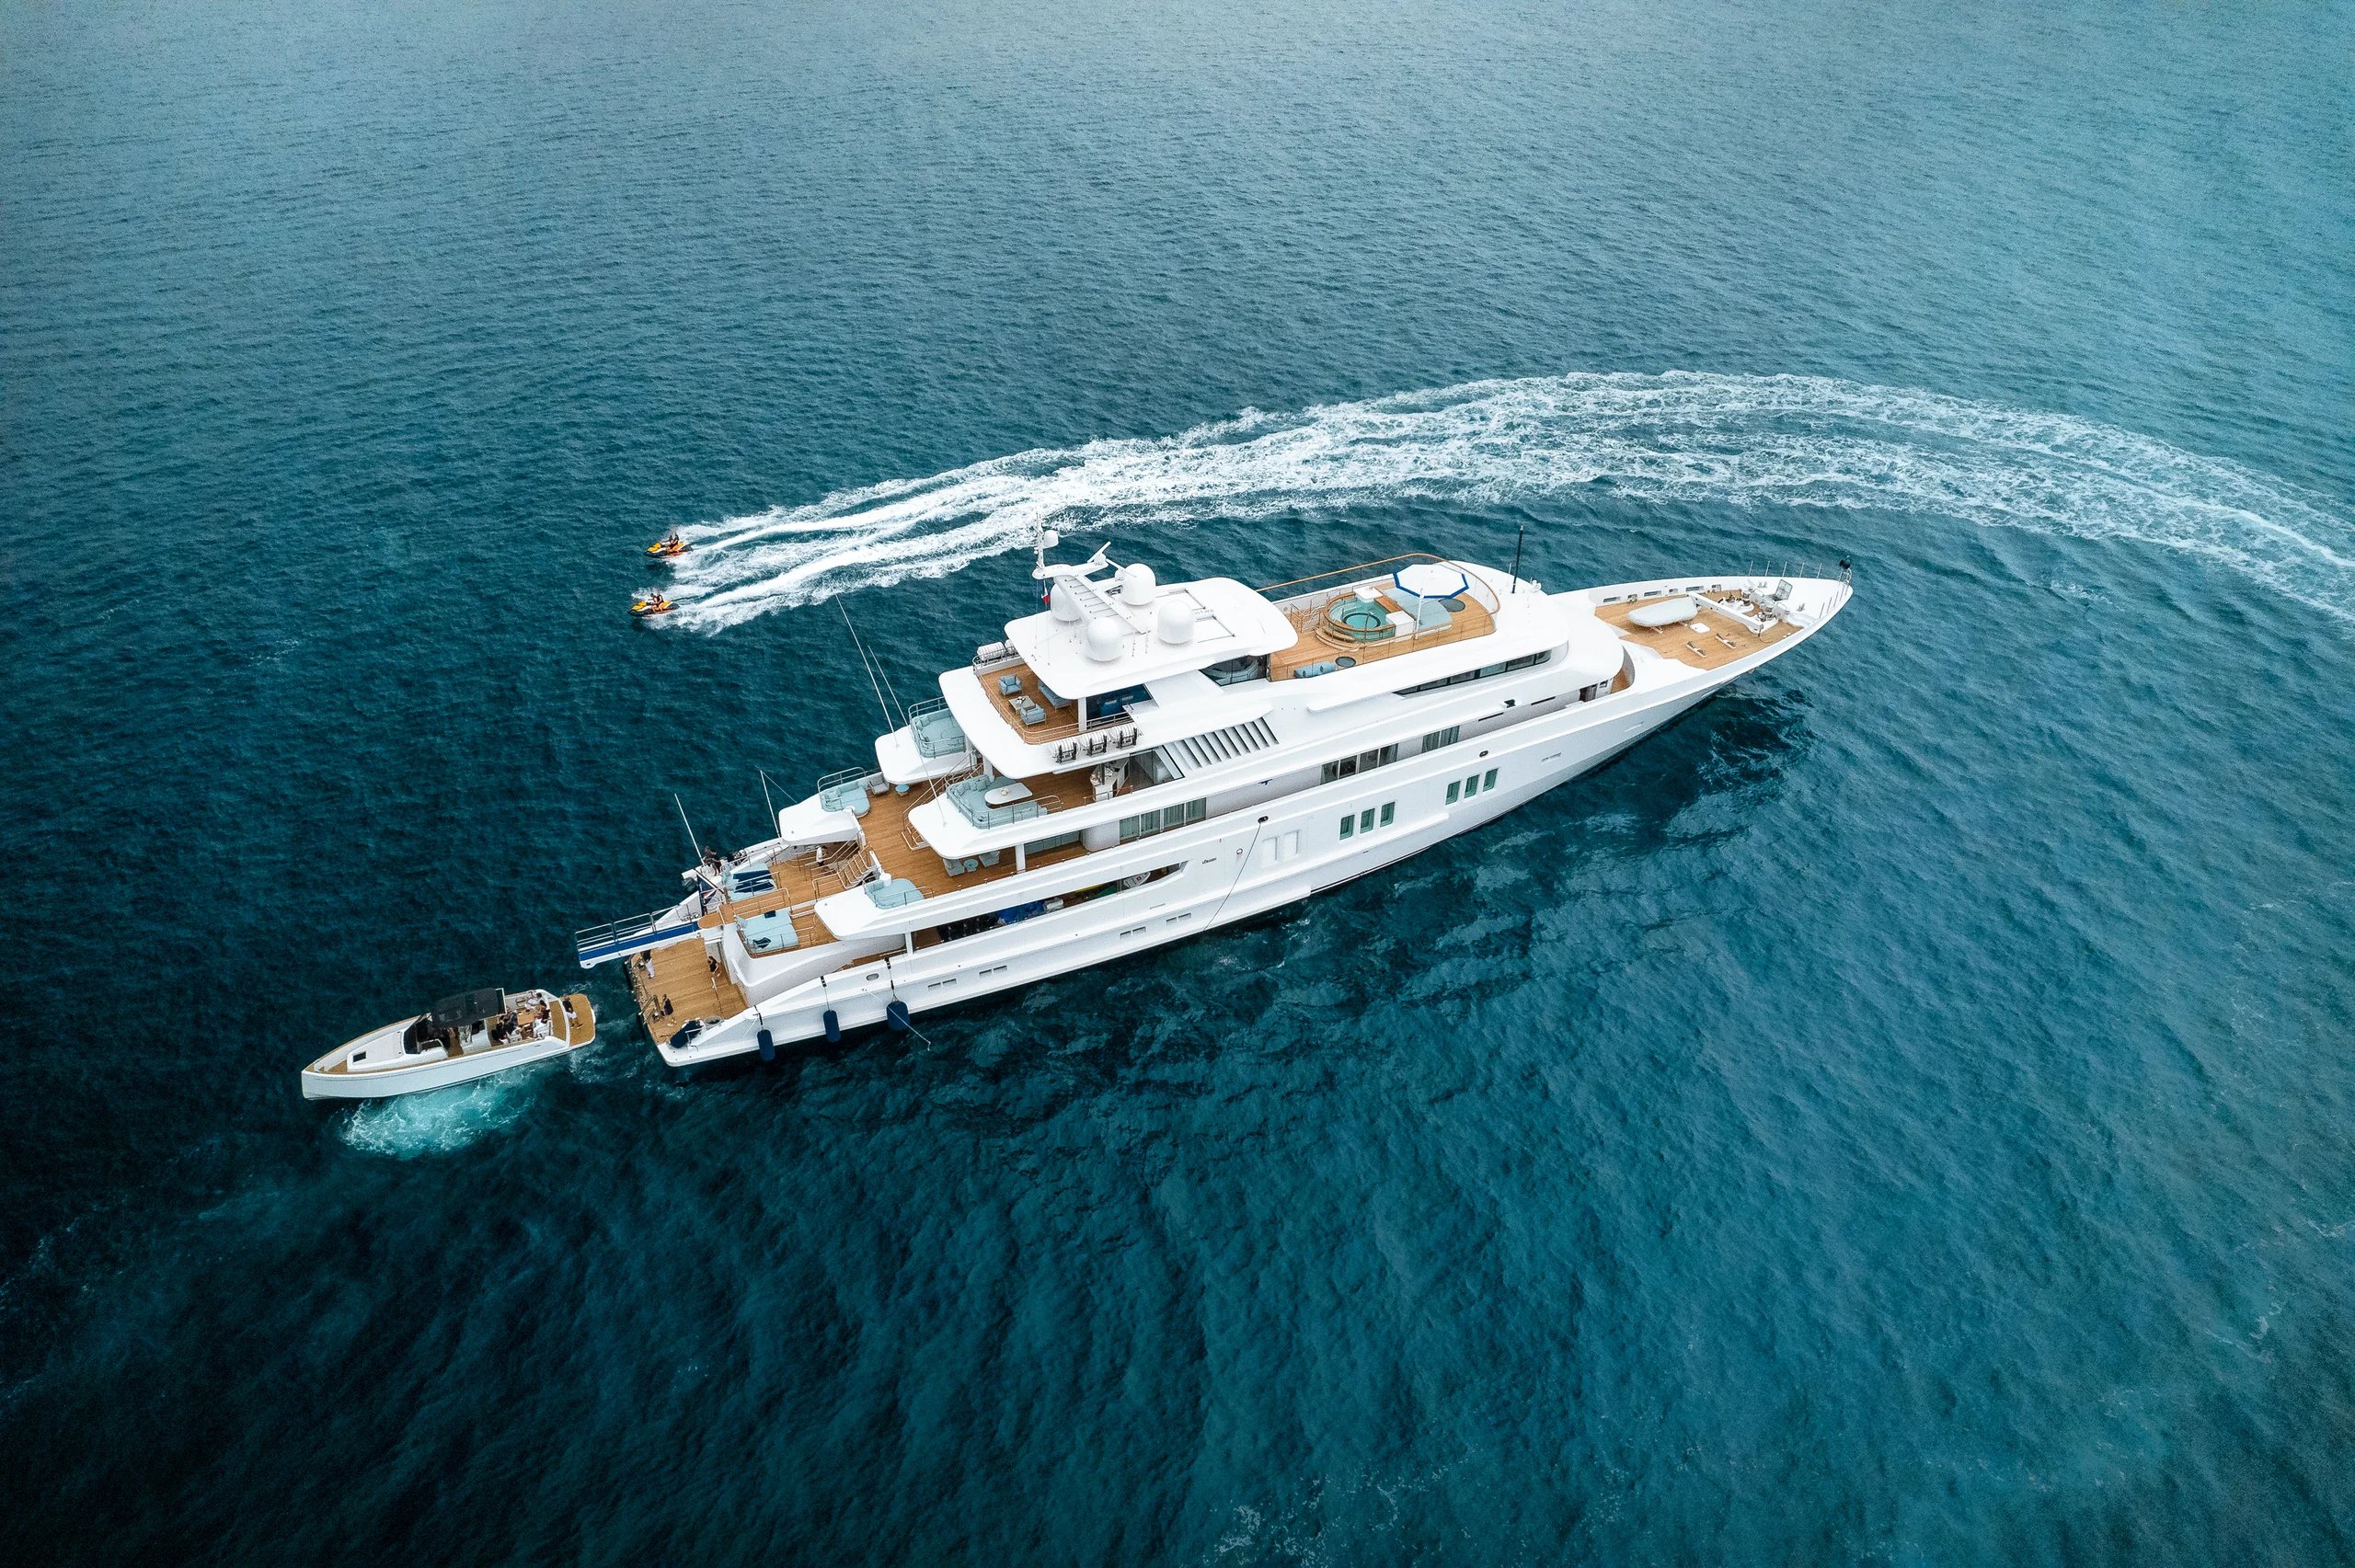 Coral Ocean yacht | Discover Coral Ocean yacht